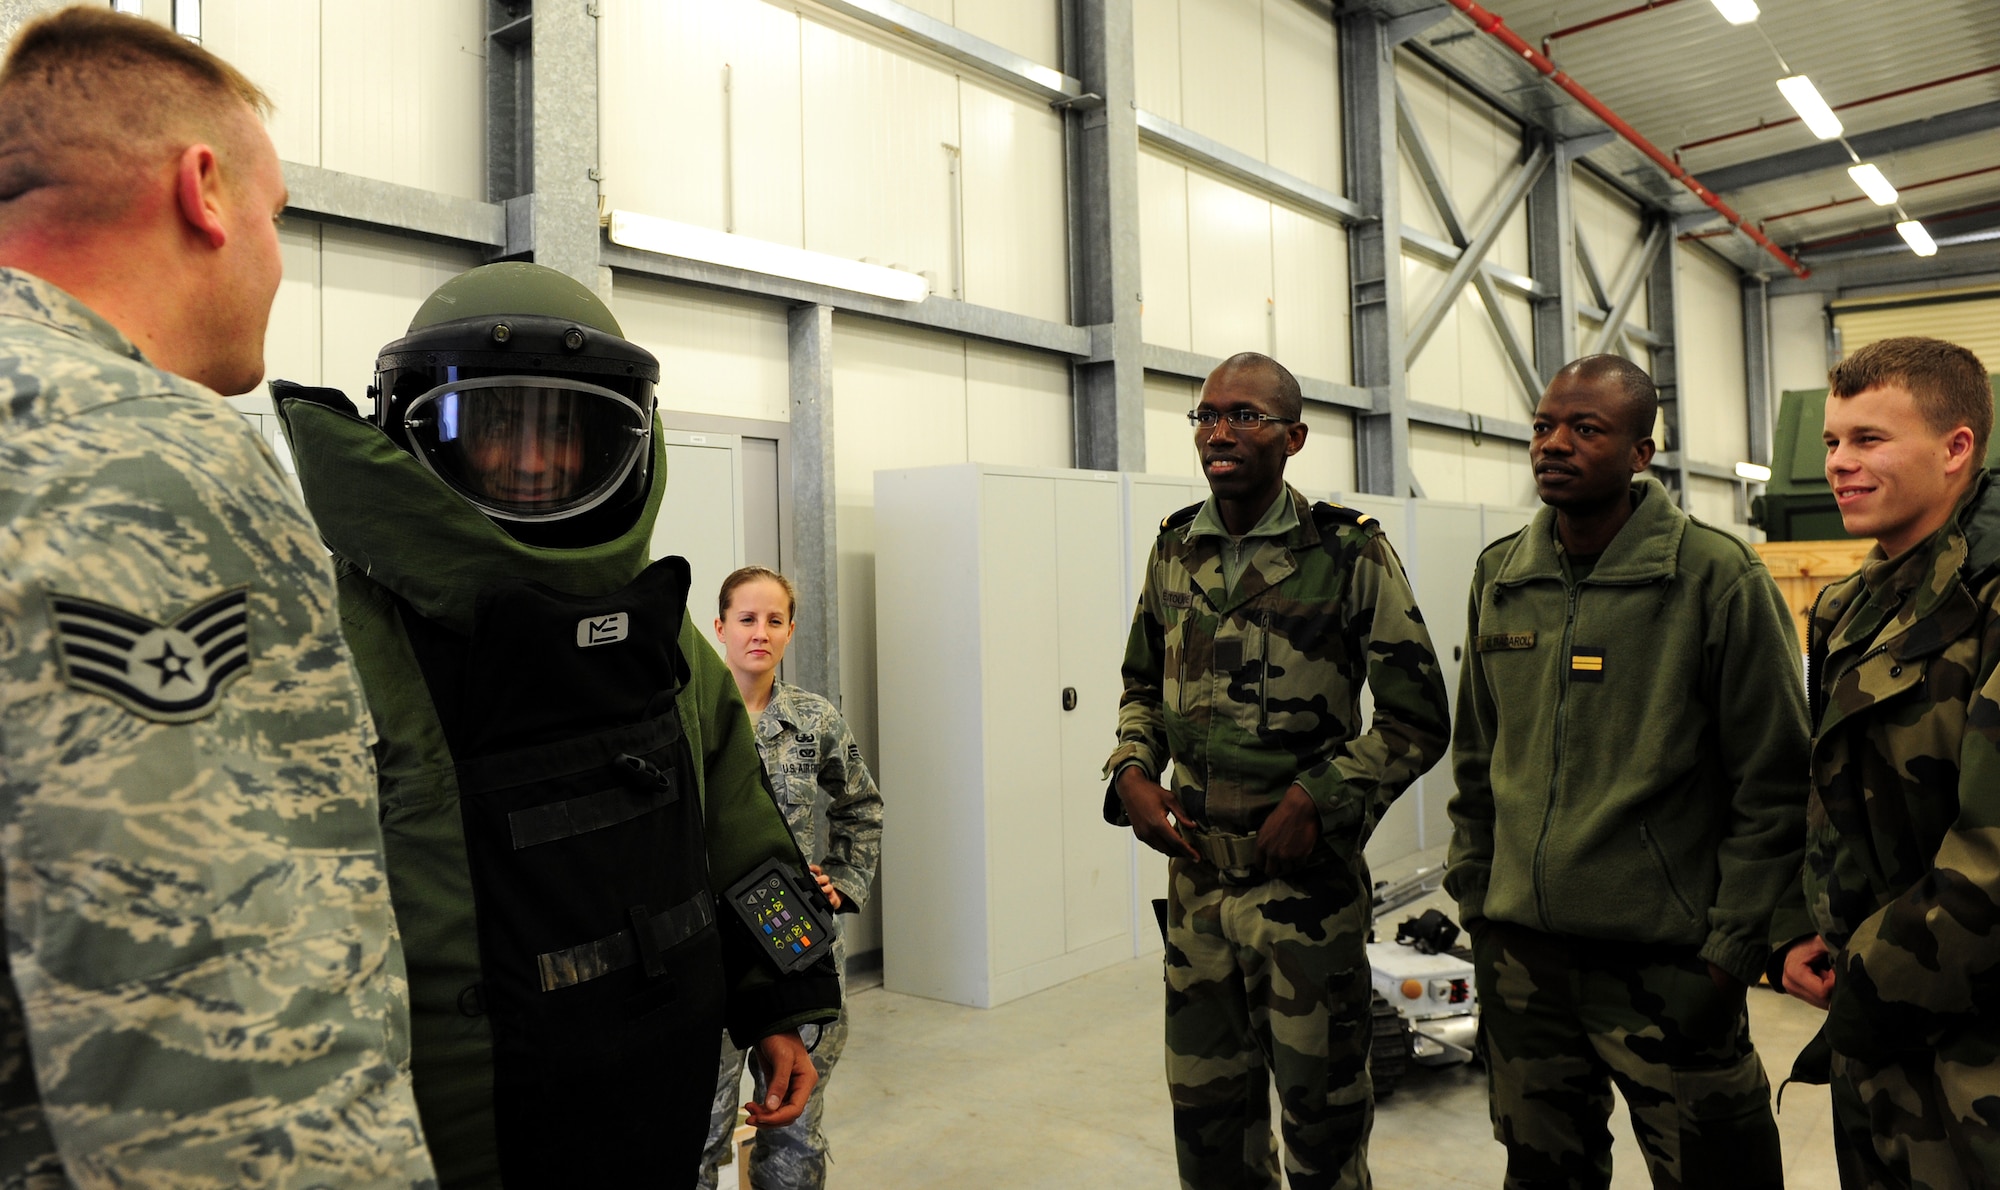 U.S. Air Force Staff Sgt. Kristopher Parker, 886th Civil Engineer Squadron, briefs French air force cadets on the significance of the Explosive Ordnance Disposal 9 bomb suit, Ramstein Air Base, Germany, Nov. 16, 2010. The cadets will be visiting several locations on base during the tour.(U.S. Air Force photo by Airman 1st Class Brea Miller)